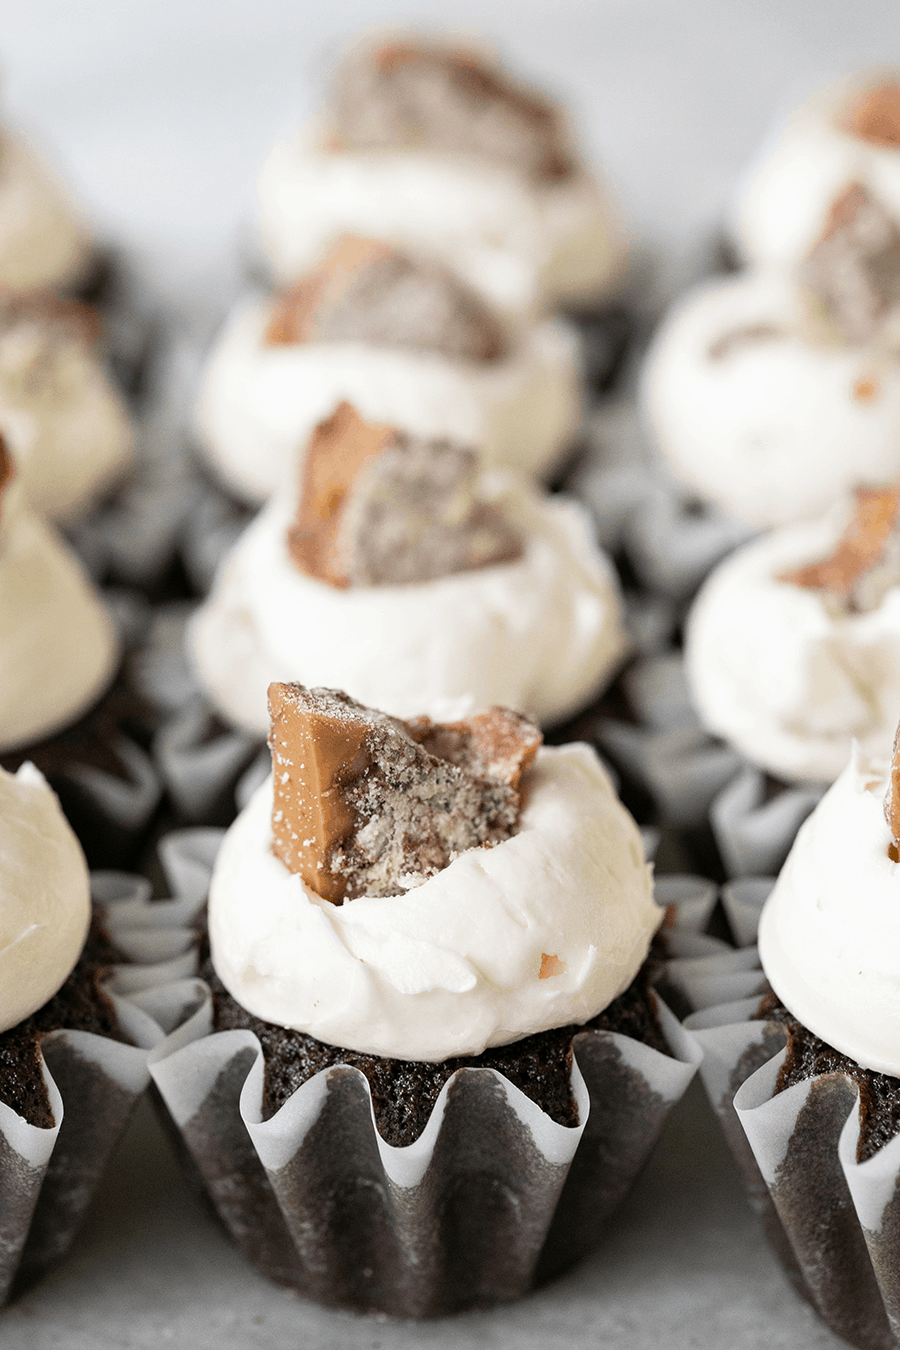 Chocolate cupcakes with homemade frosting topped with a chunk of toffee.